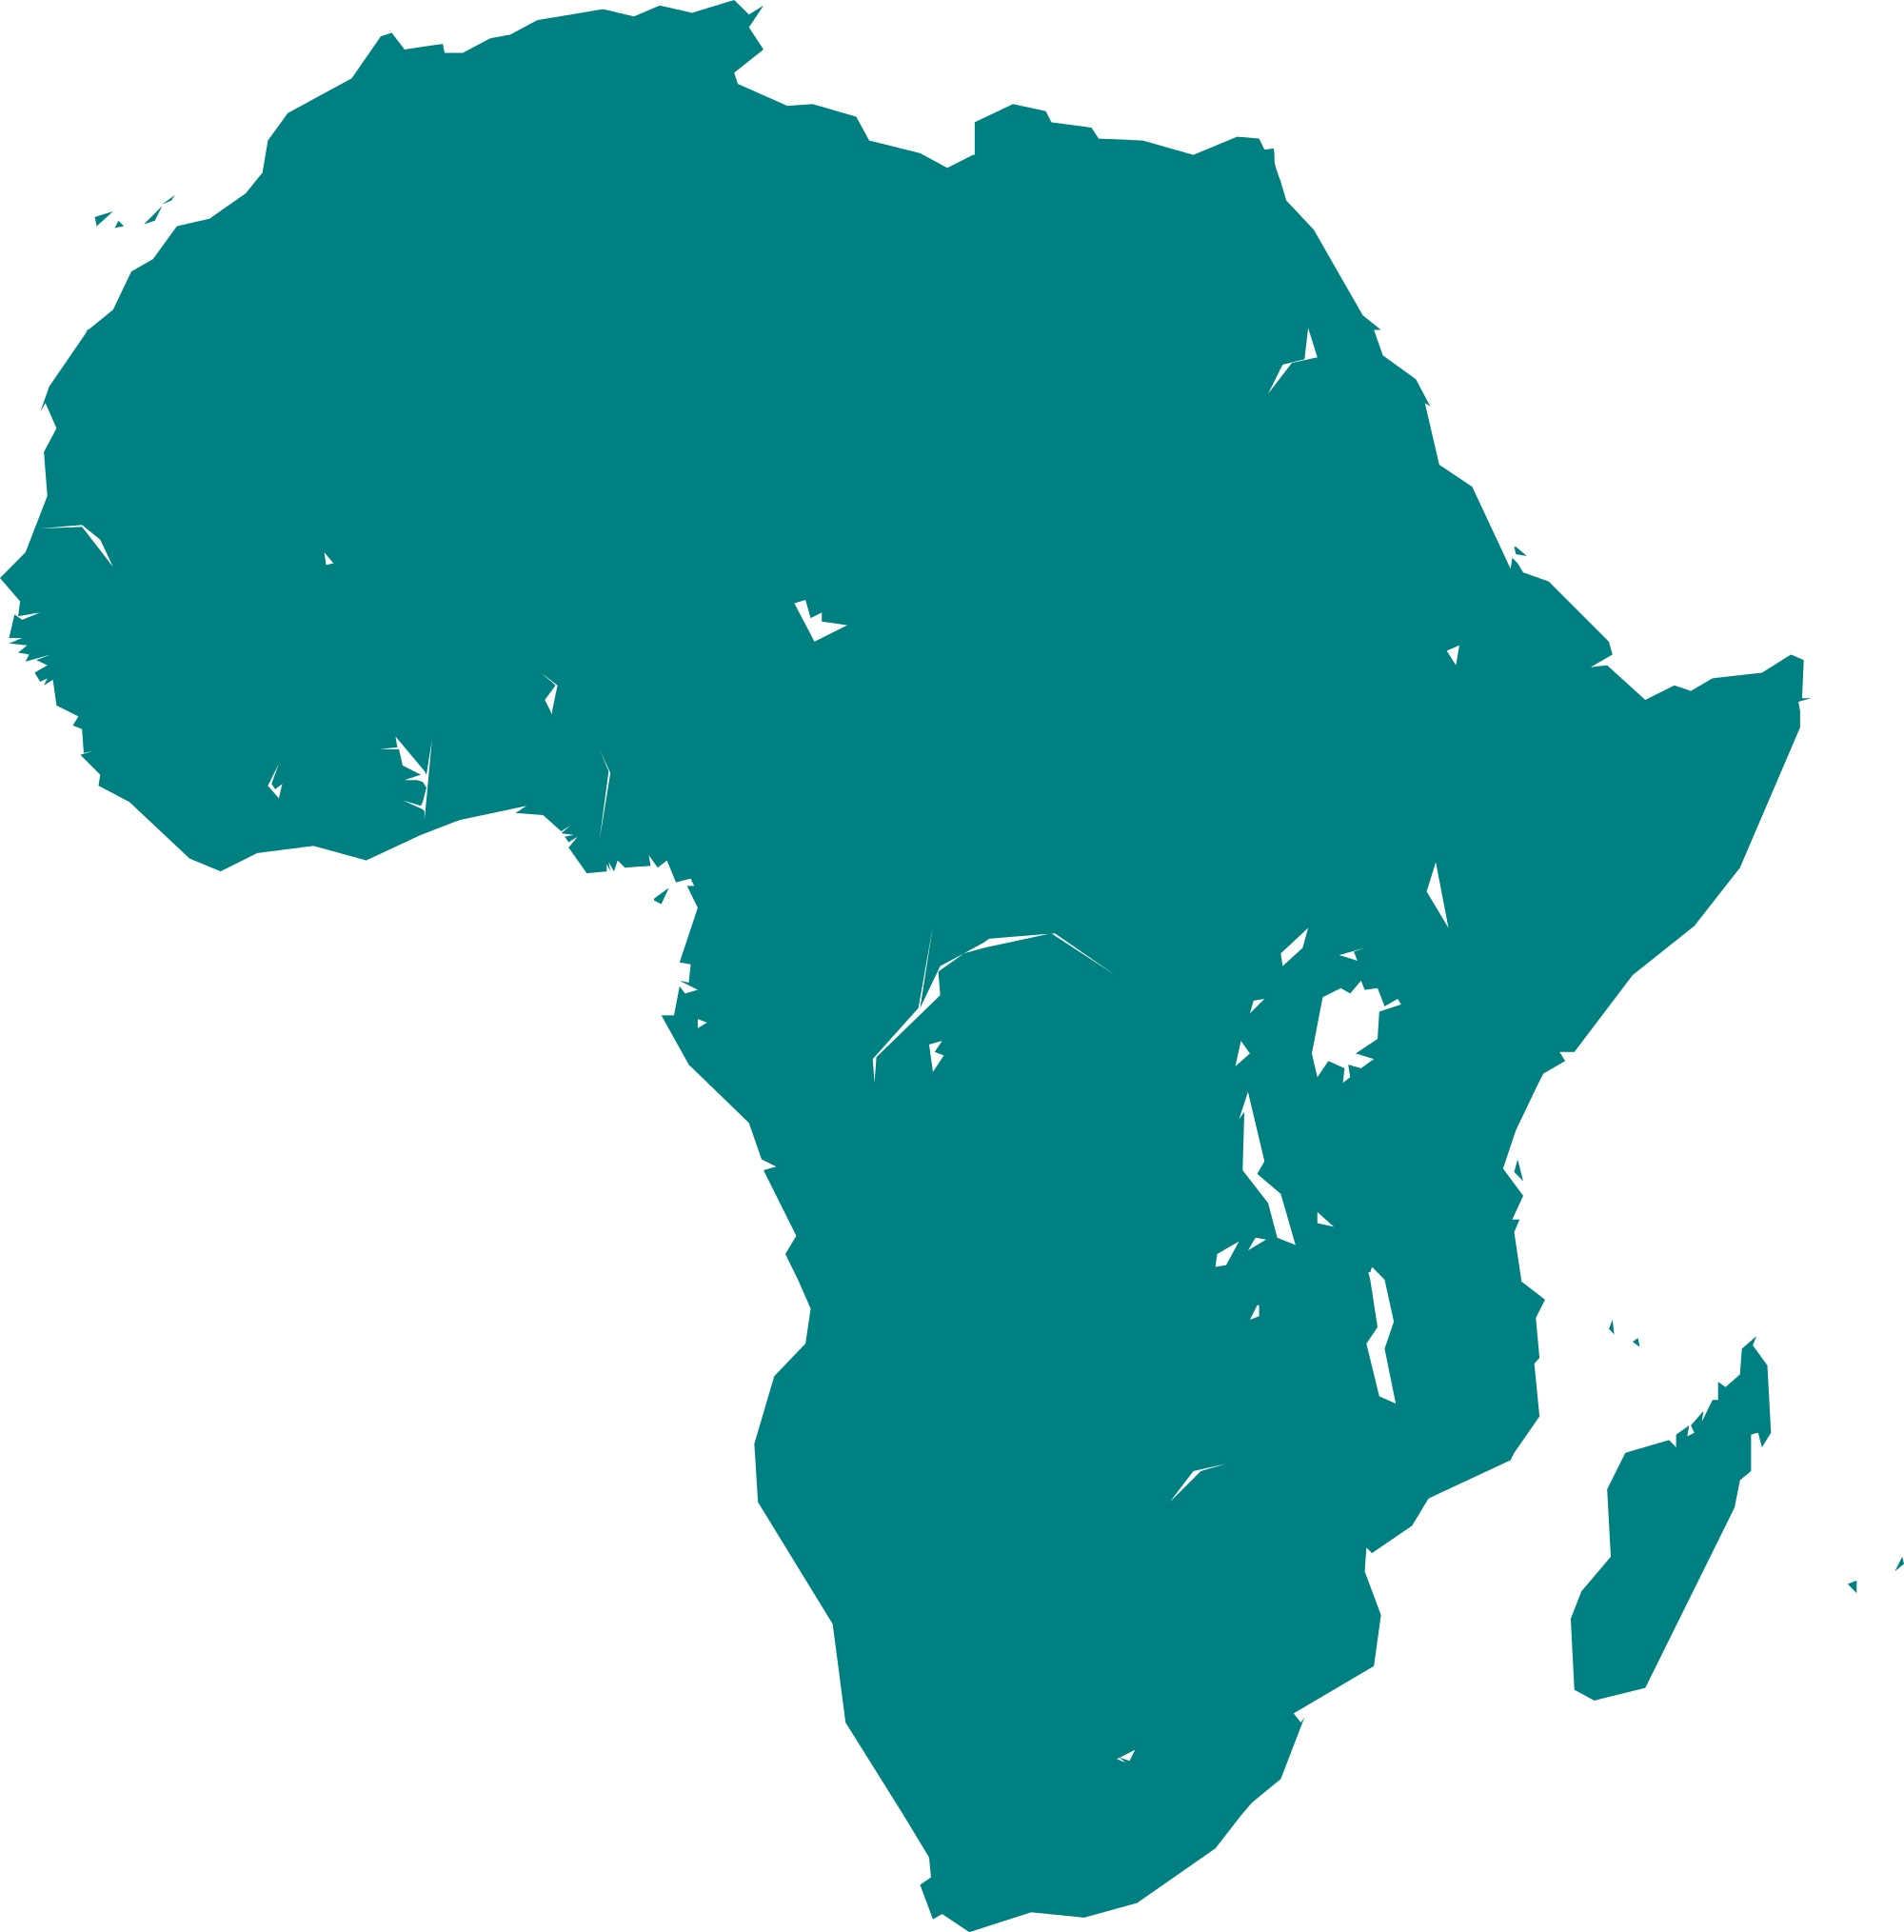 Africa, Country and Africa map